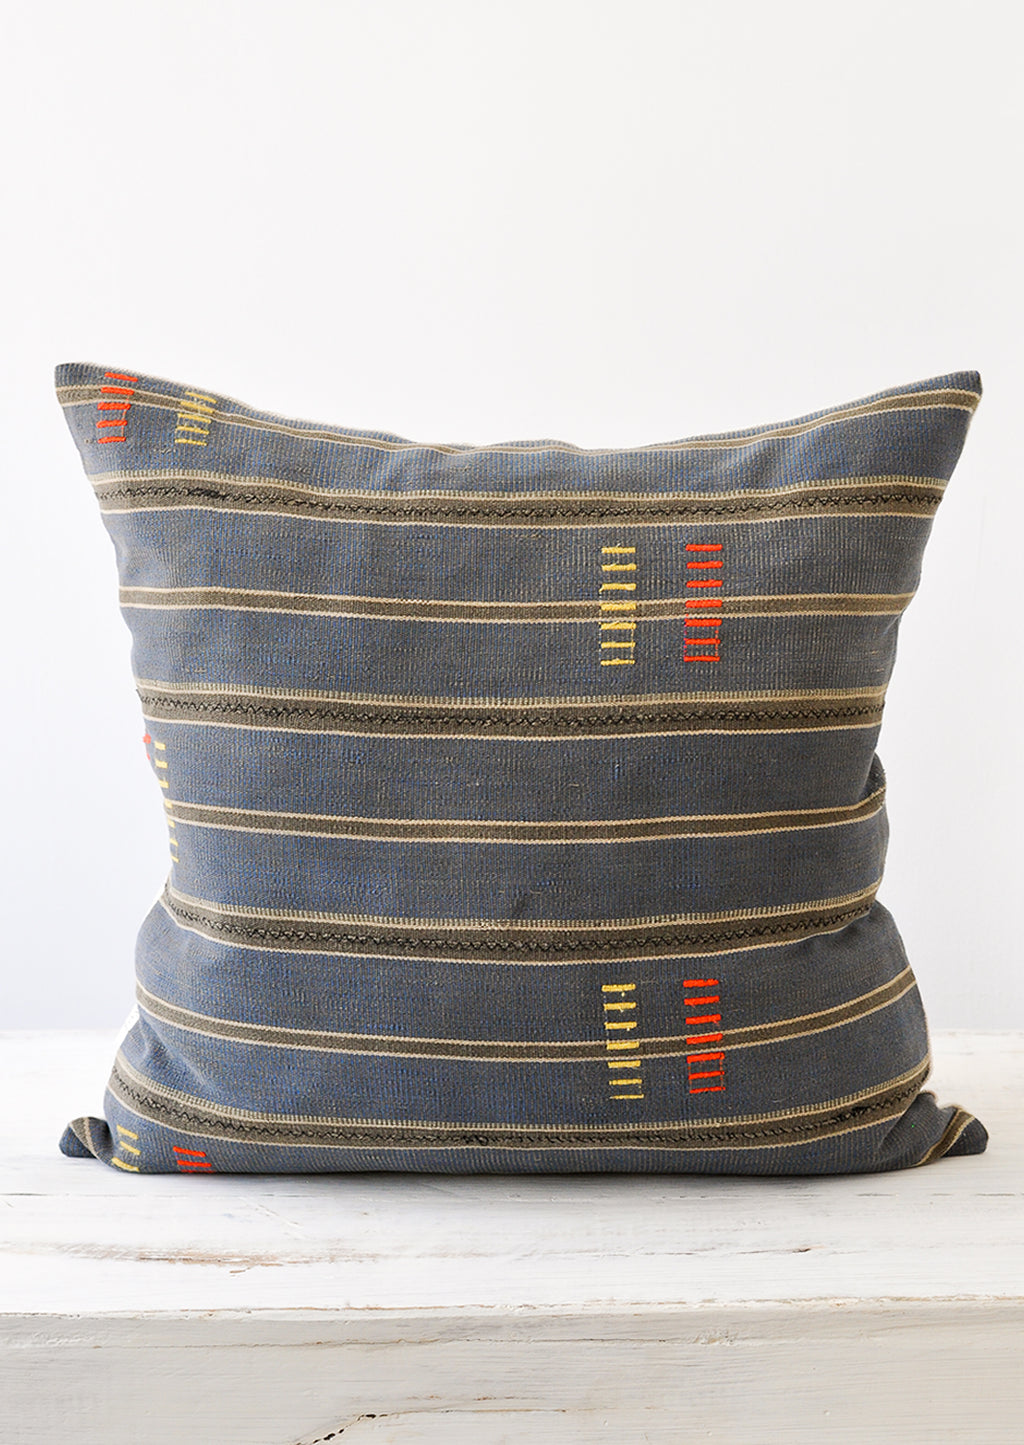 1: An indigo and dark grey striped pillow with yellow and red dash embroidery.